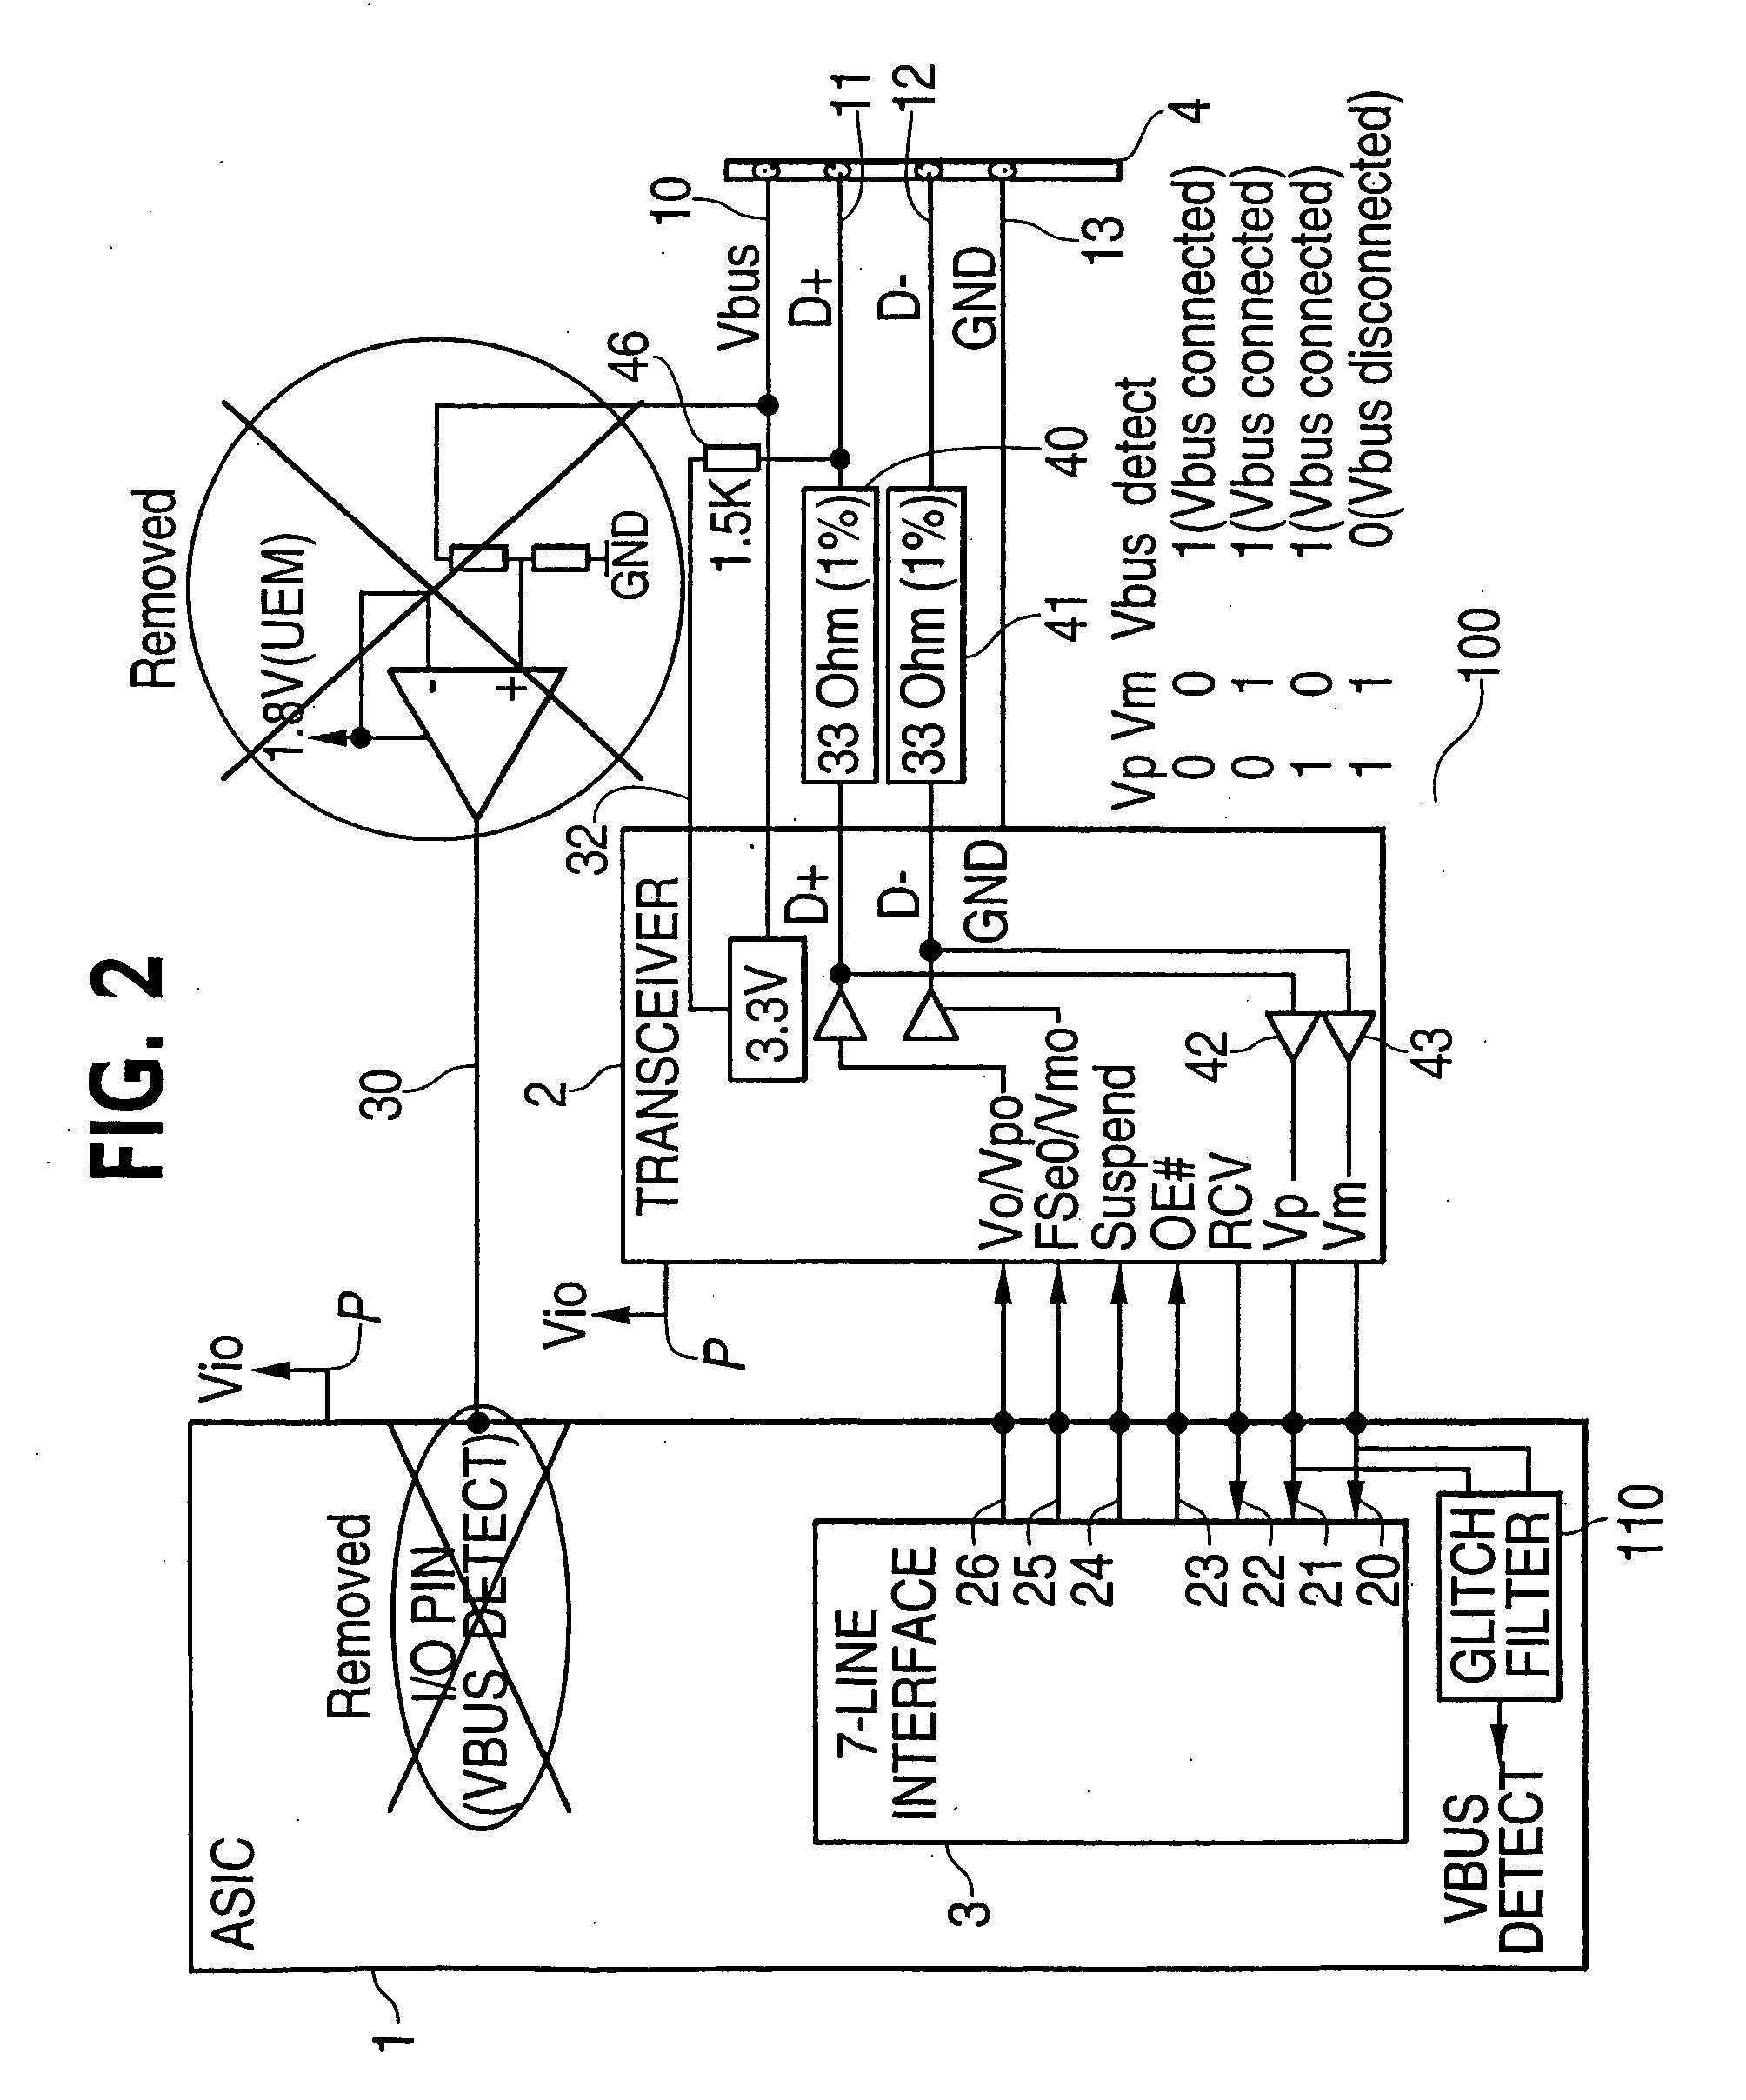 Universal serial bus circuit which detects connection status to a USB host